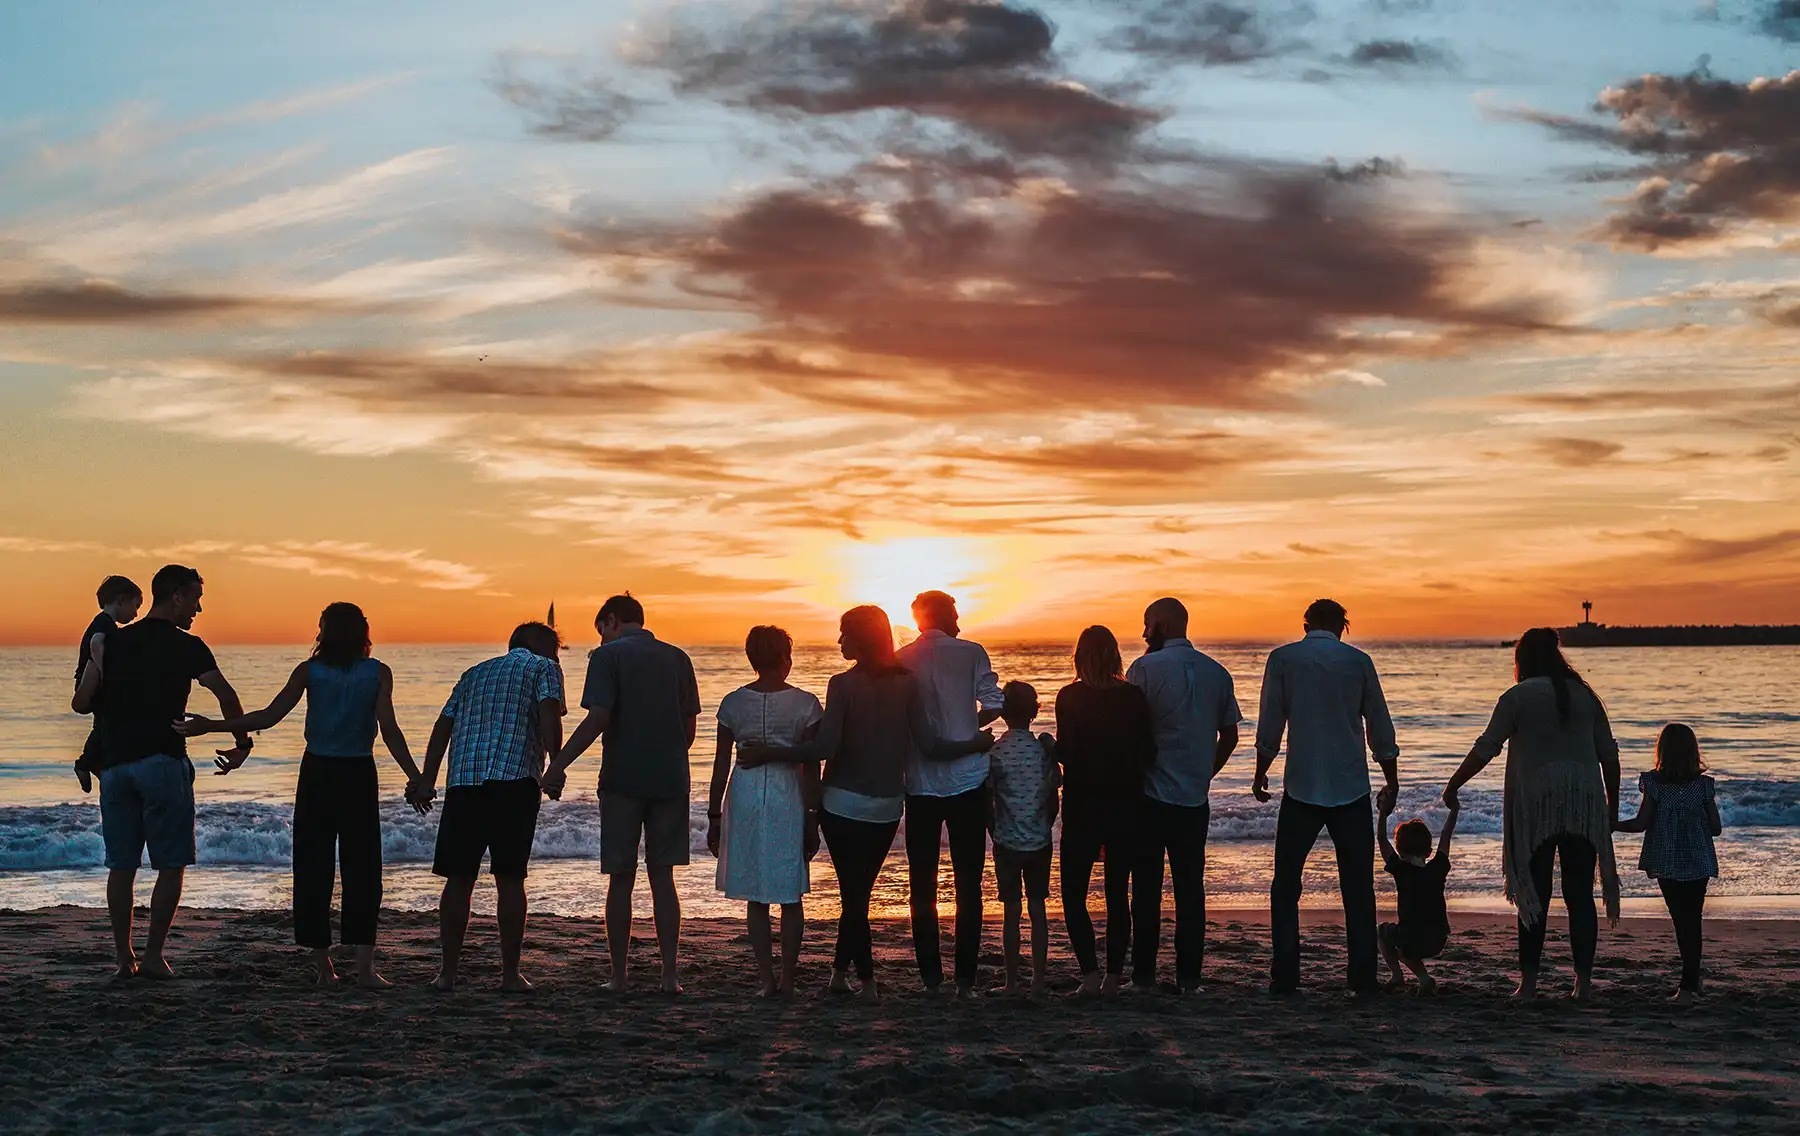 Large, multi-generation family holding hands on the shore of a beach, silhouetted by the sunset.